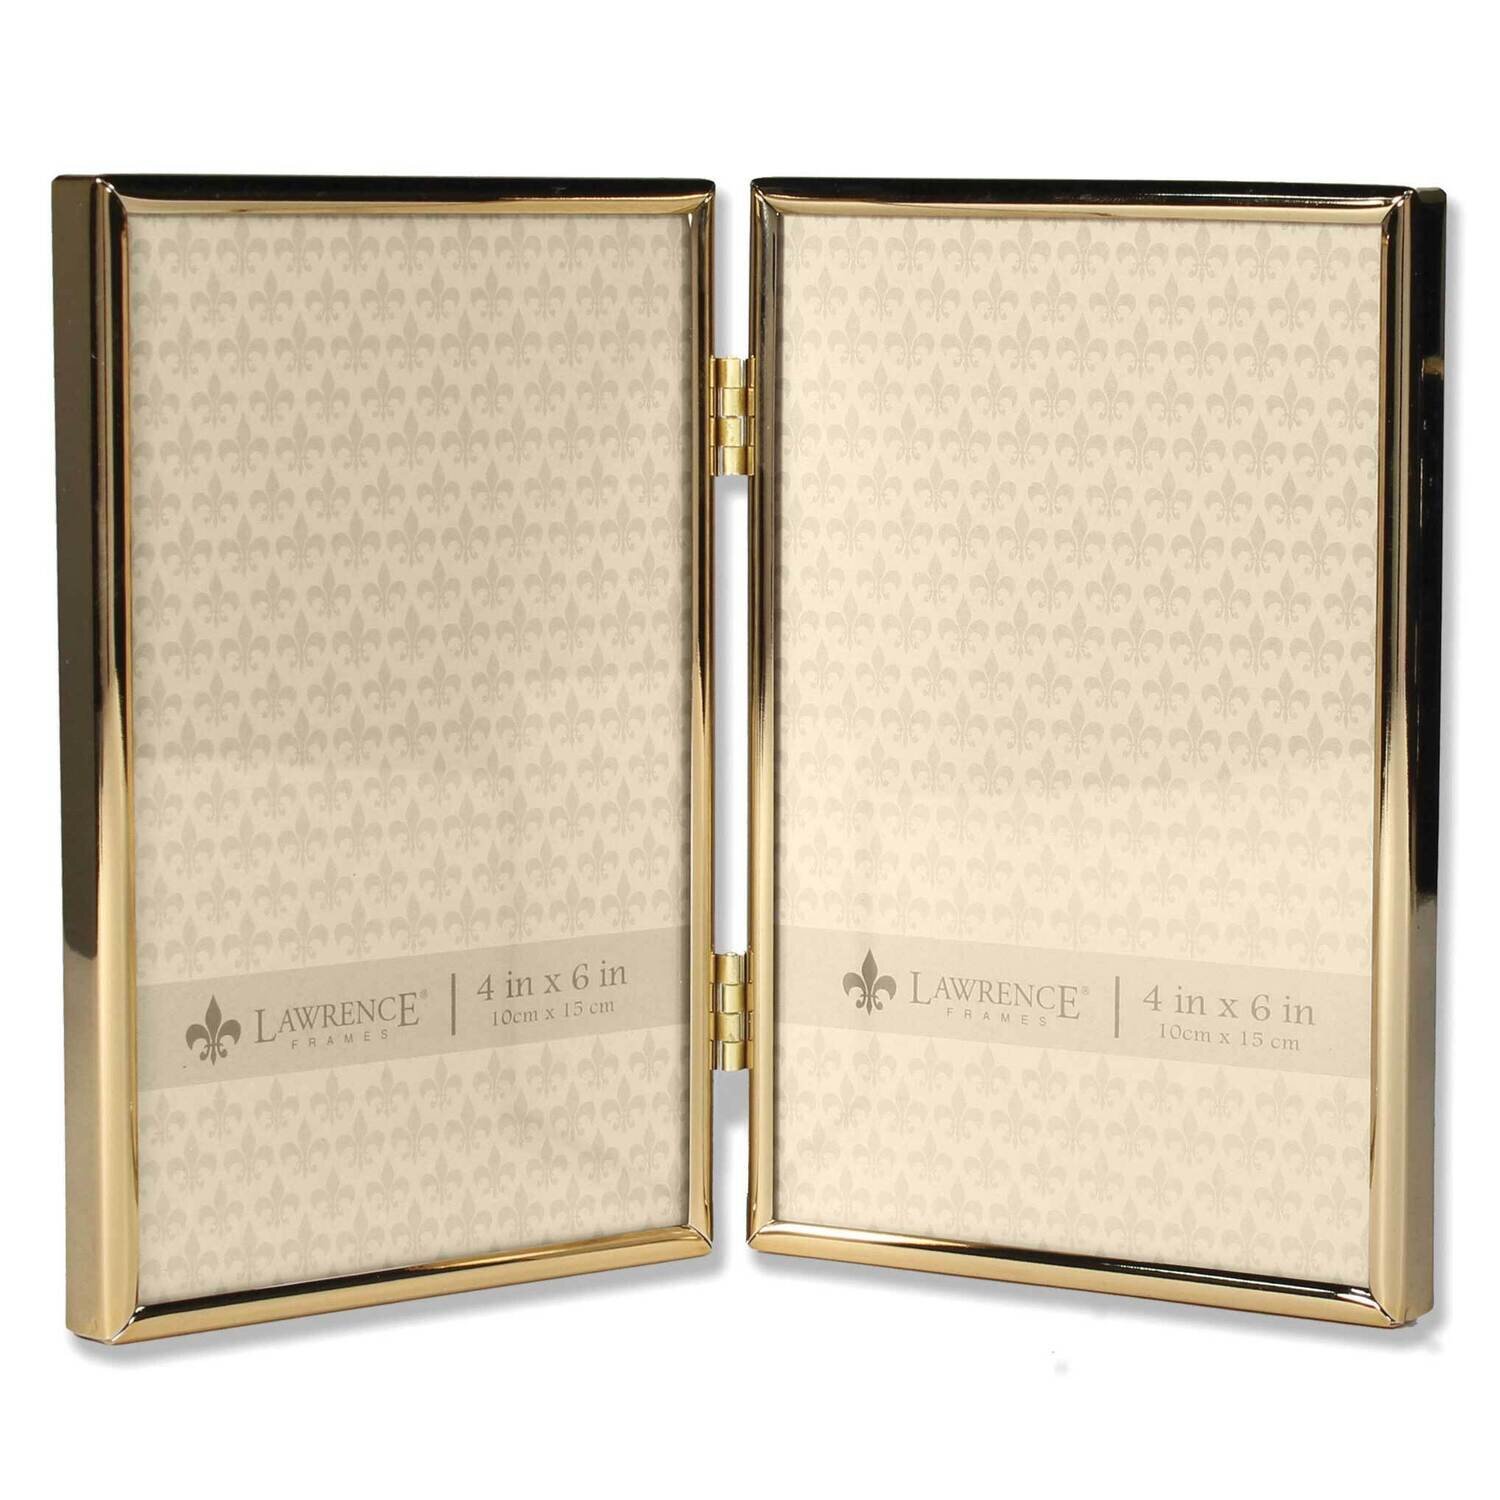 4 x 6 Inch Hinged Double Simply Gold-tone Metal Picture Frame GM22271